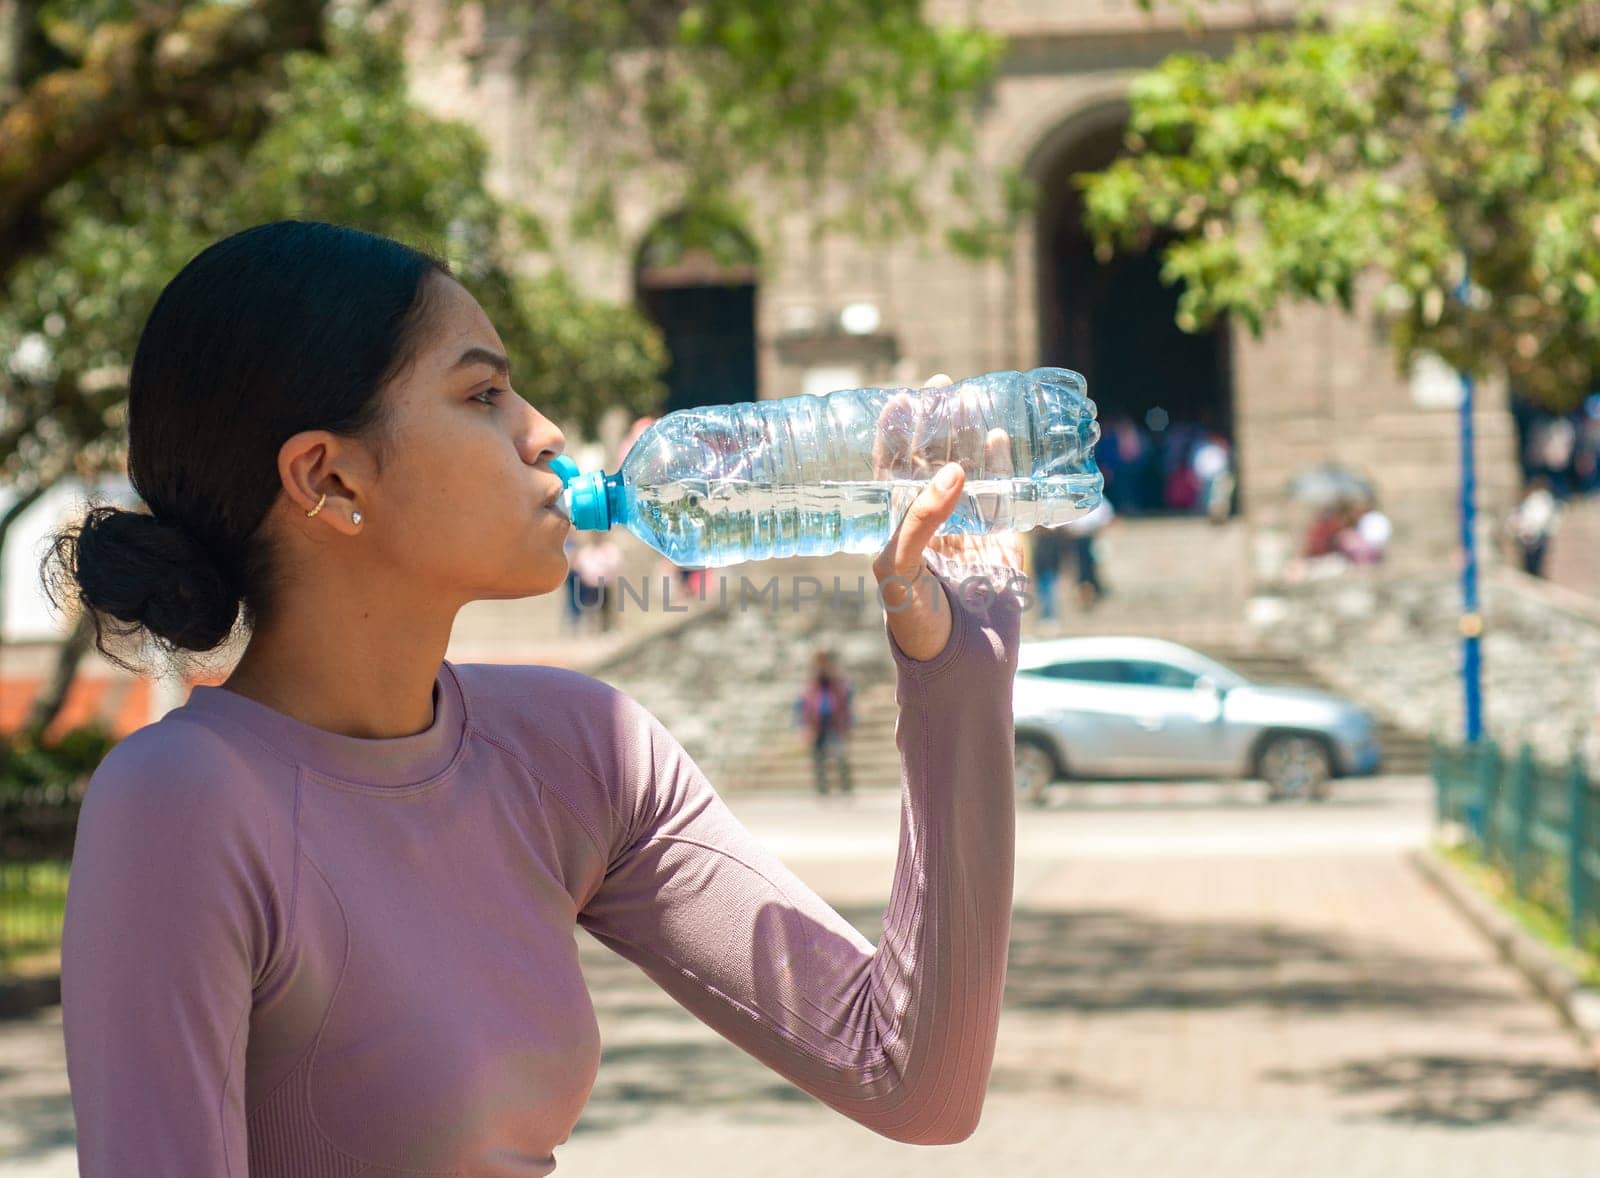 A Latina woman elegantly drinks cool, clear water from a plastic bottle in the city center during a quiet moment in her solo tourist experience. by Raulmartin